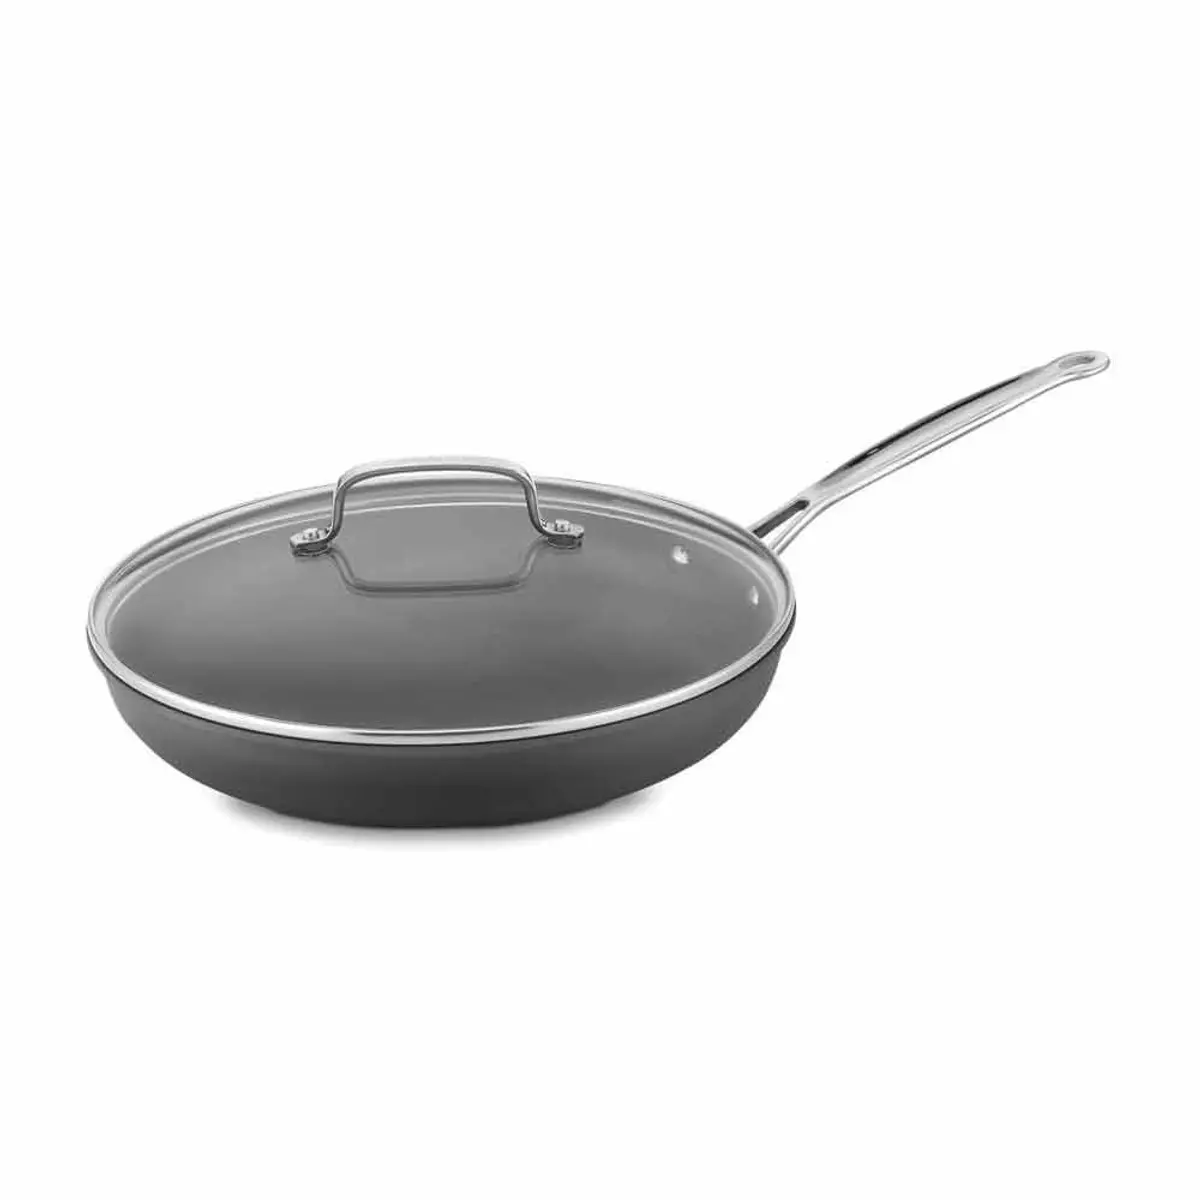 Cuisinart 622-30G Chef's Classic Nonstick Hard-Anodized 12-Inch Skillet